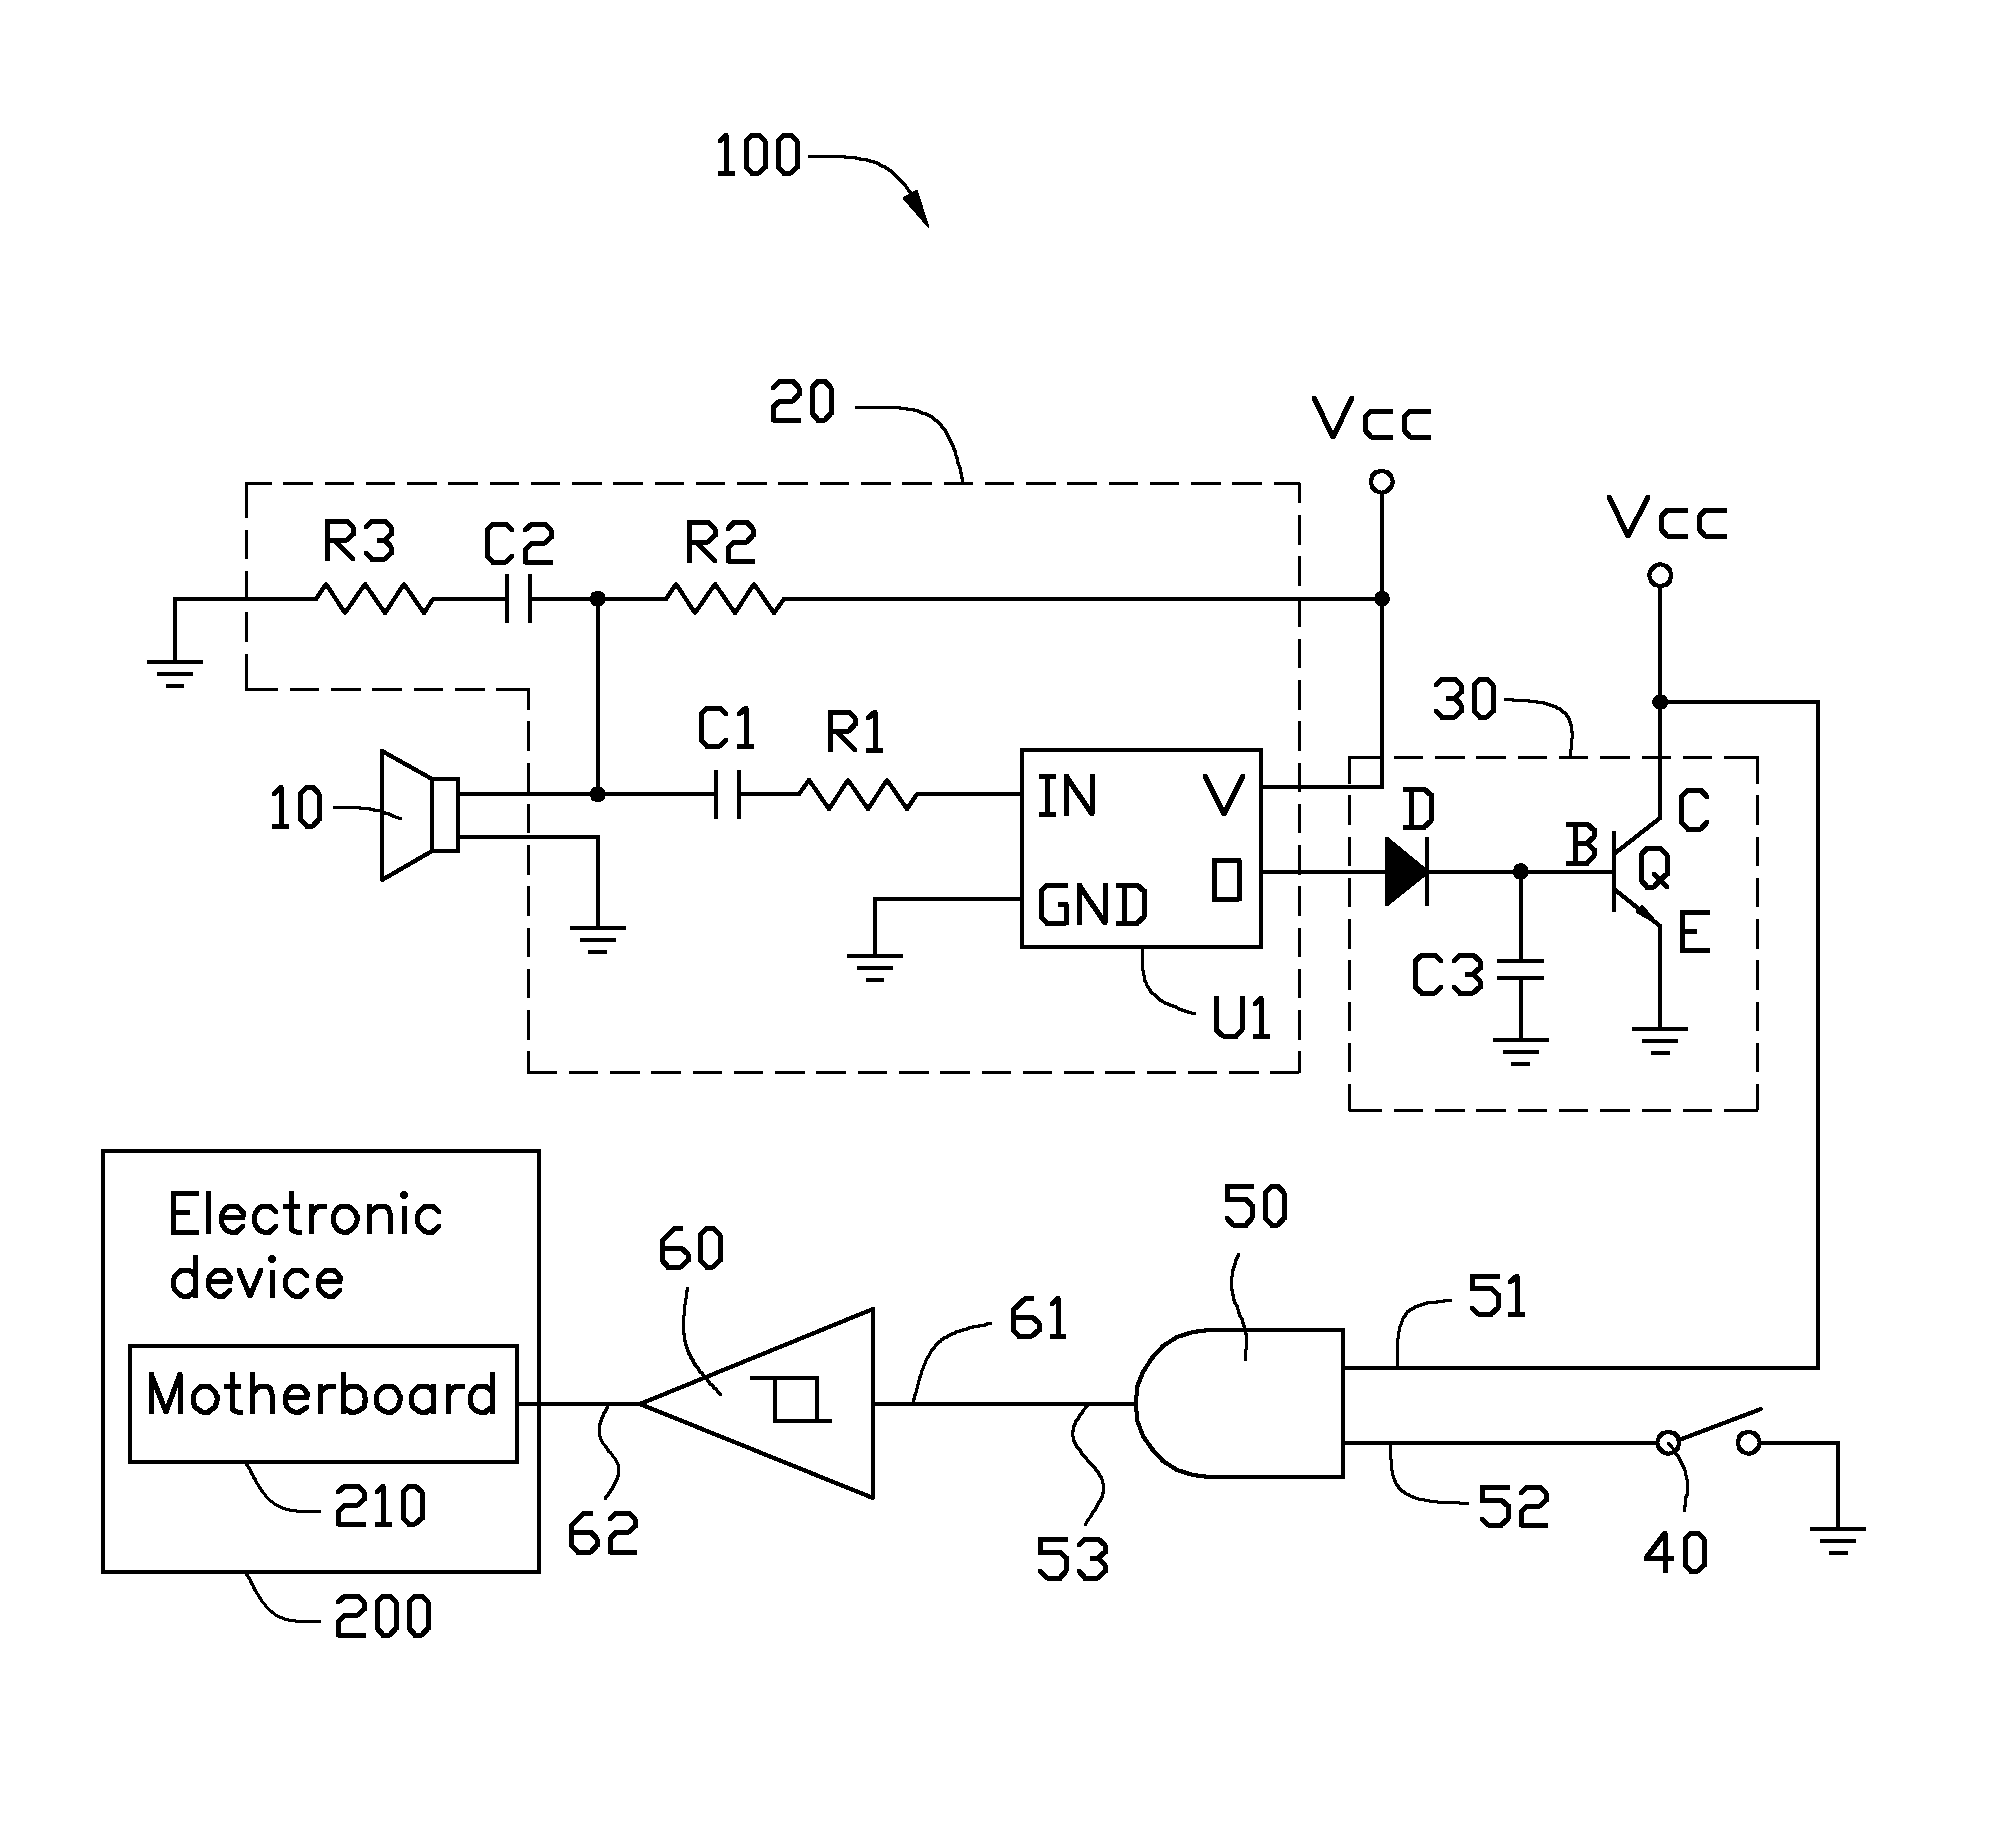 Voice control circuit for starting electronic devices